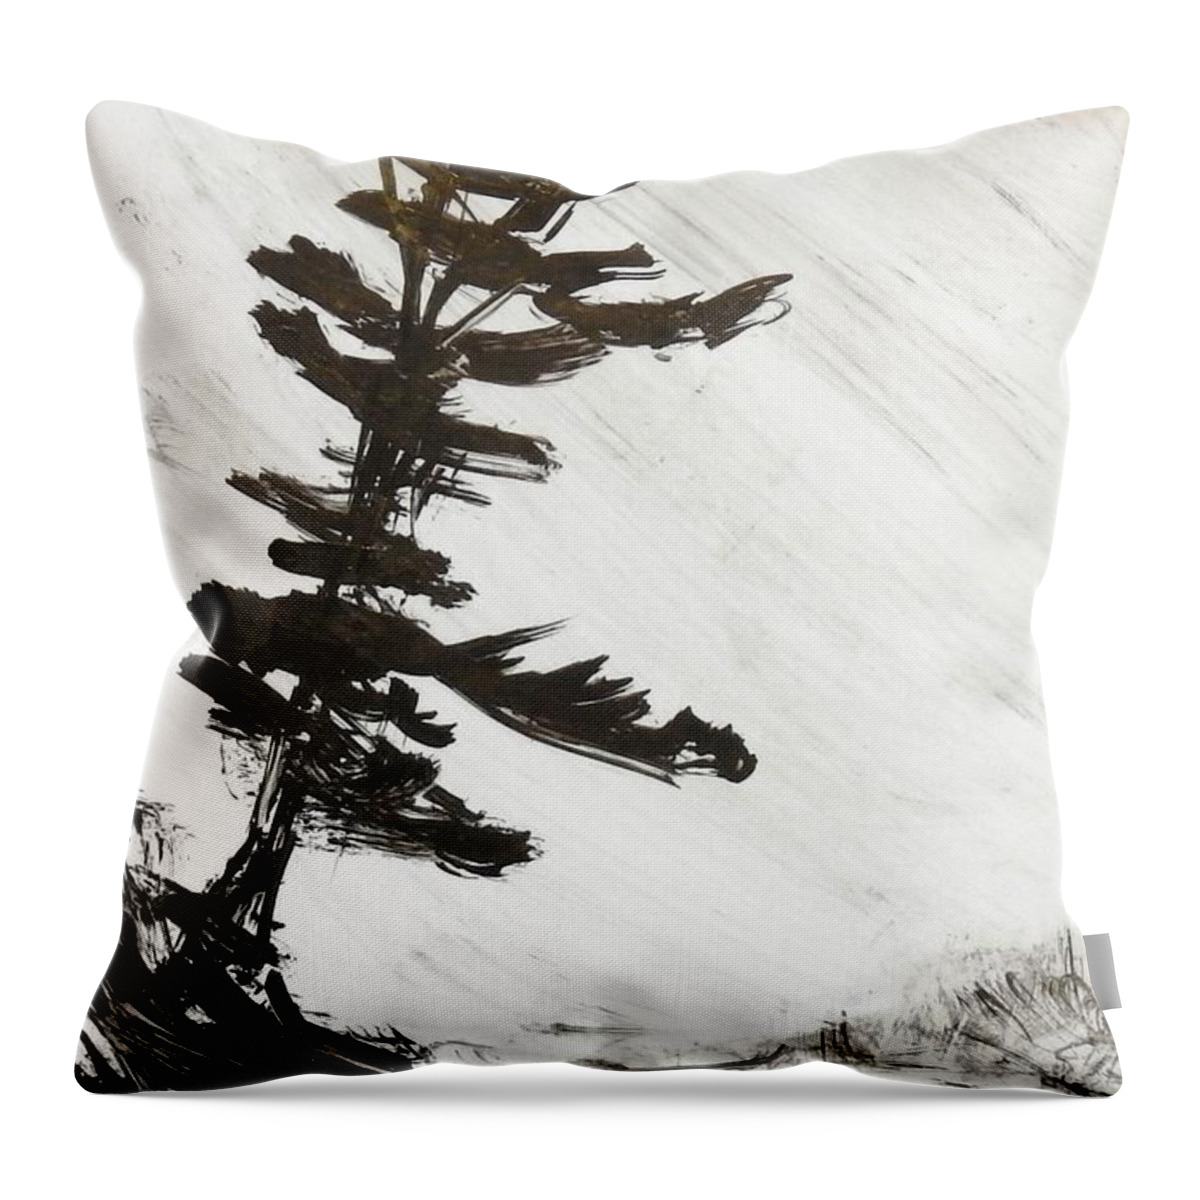 India Ink Throw Pillow featuring the painting Ink pochade41 by Petra Burgmann